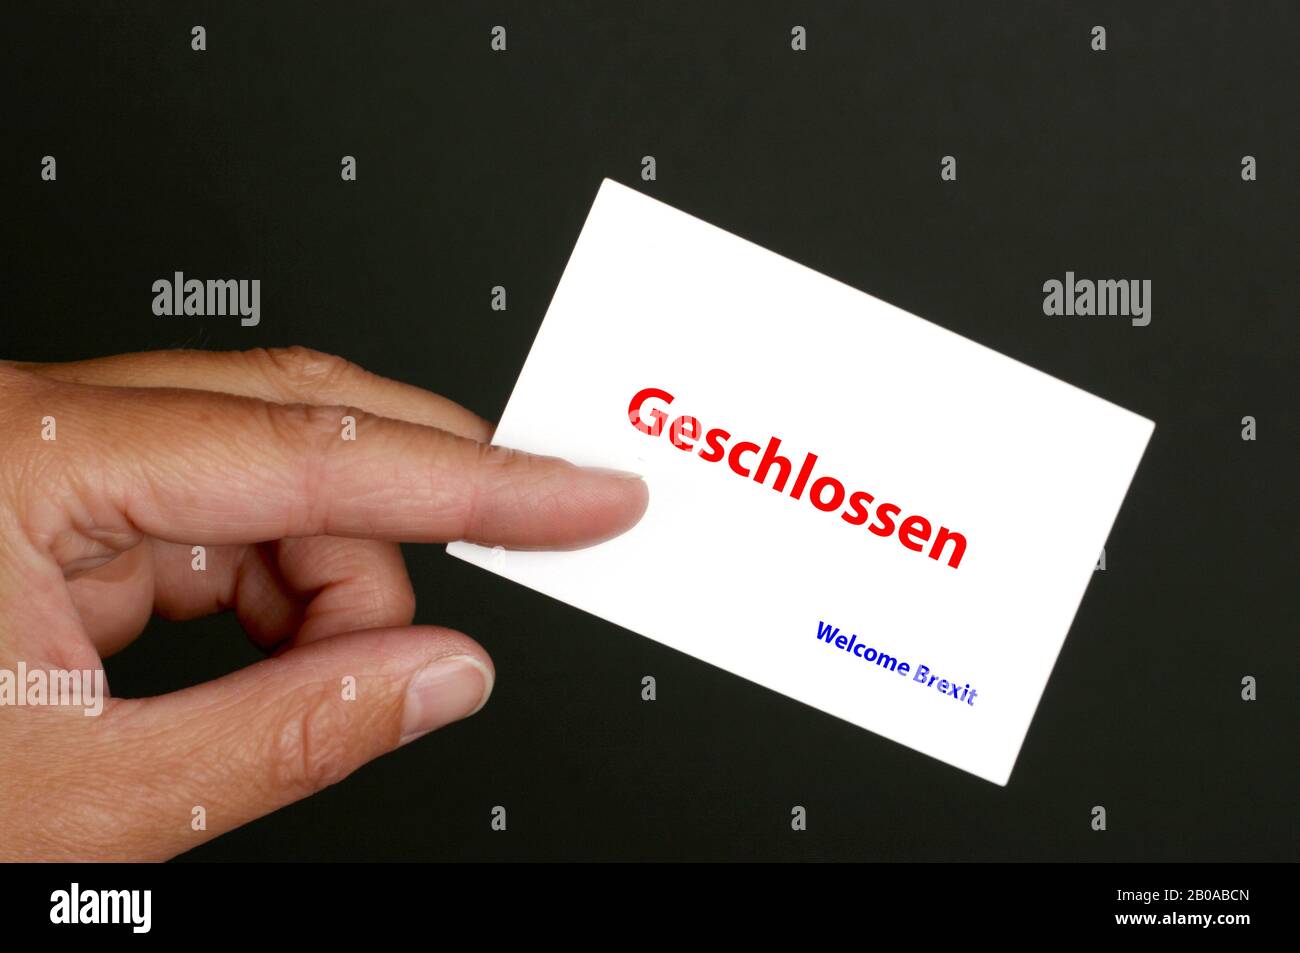 hand against black background holding card lettering Geschlossen, close, Welcome Brexit, Germany Stock Photo